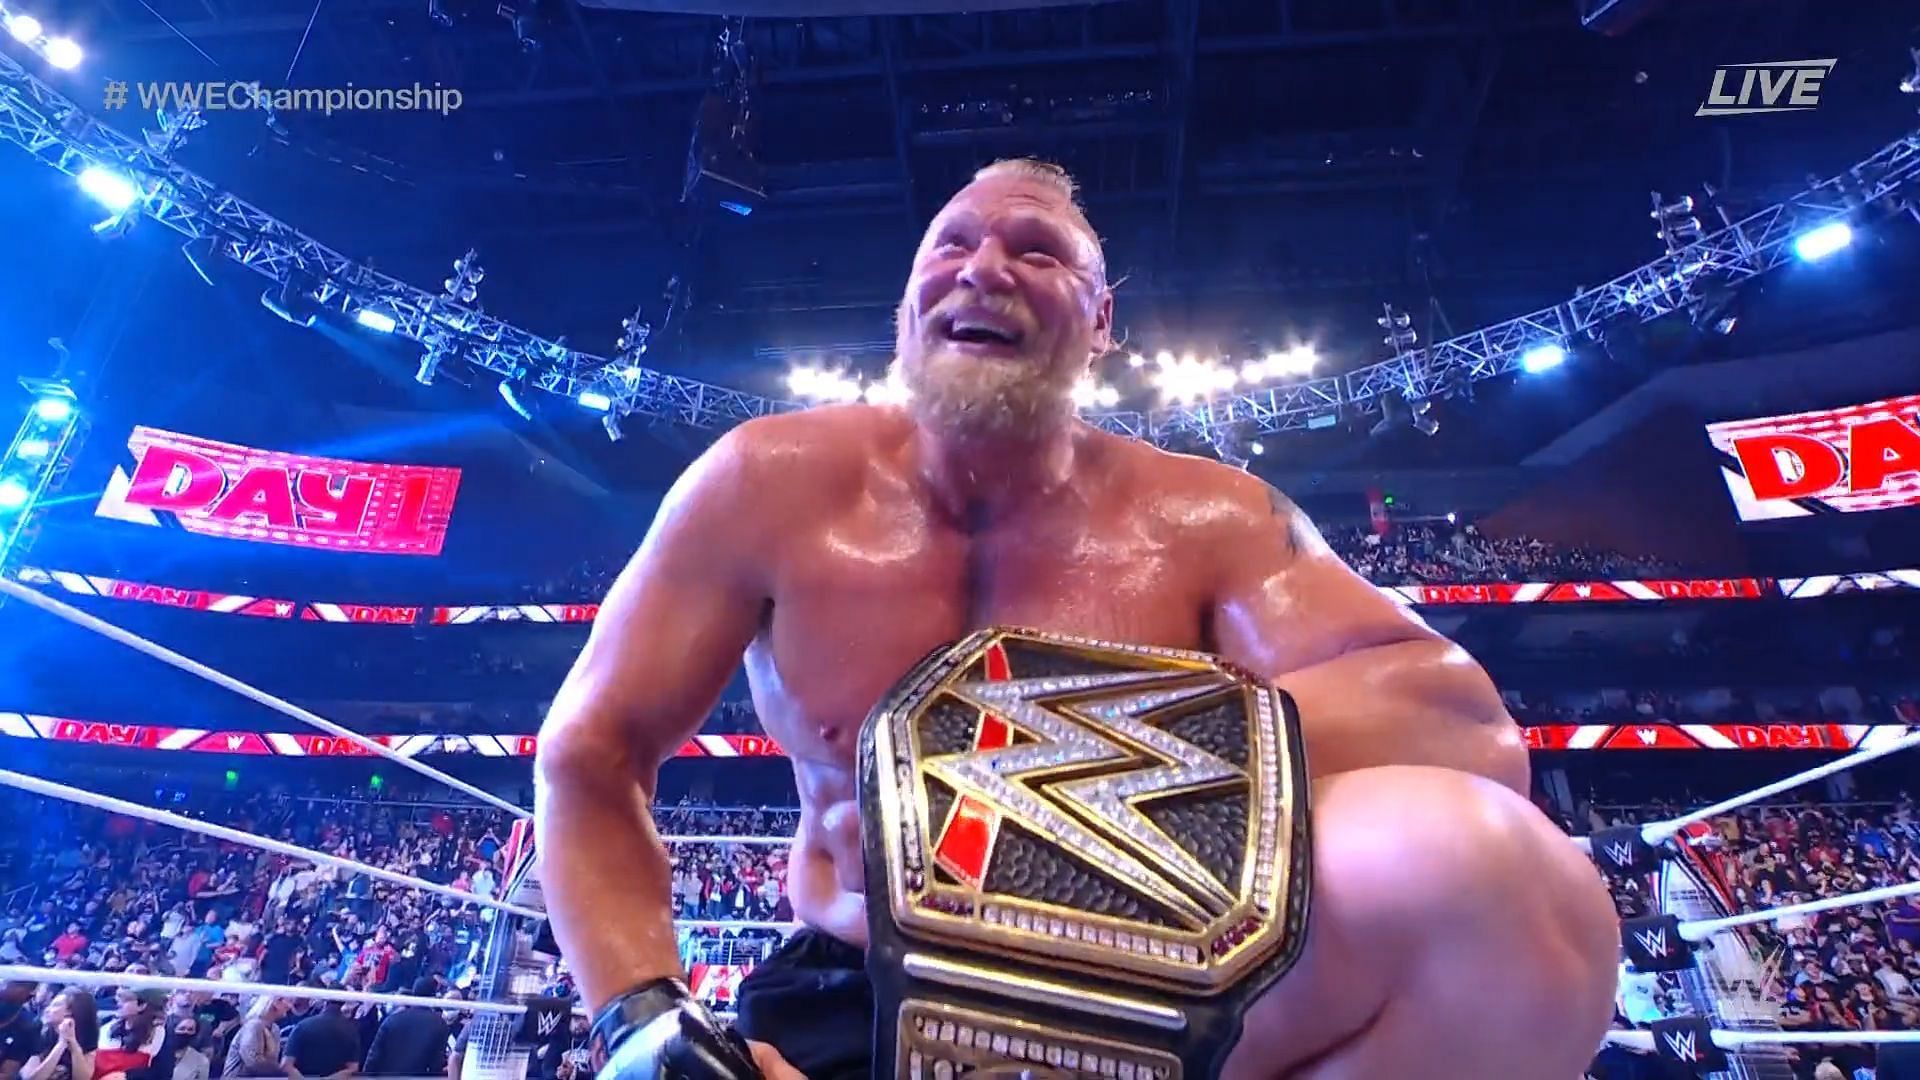 Brock Lesnar has captured the WWE Championship on Day 1